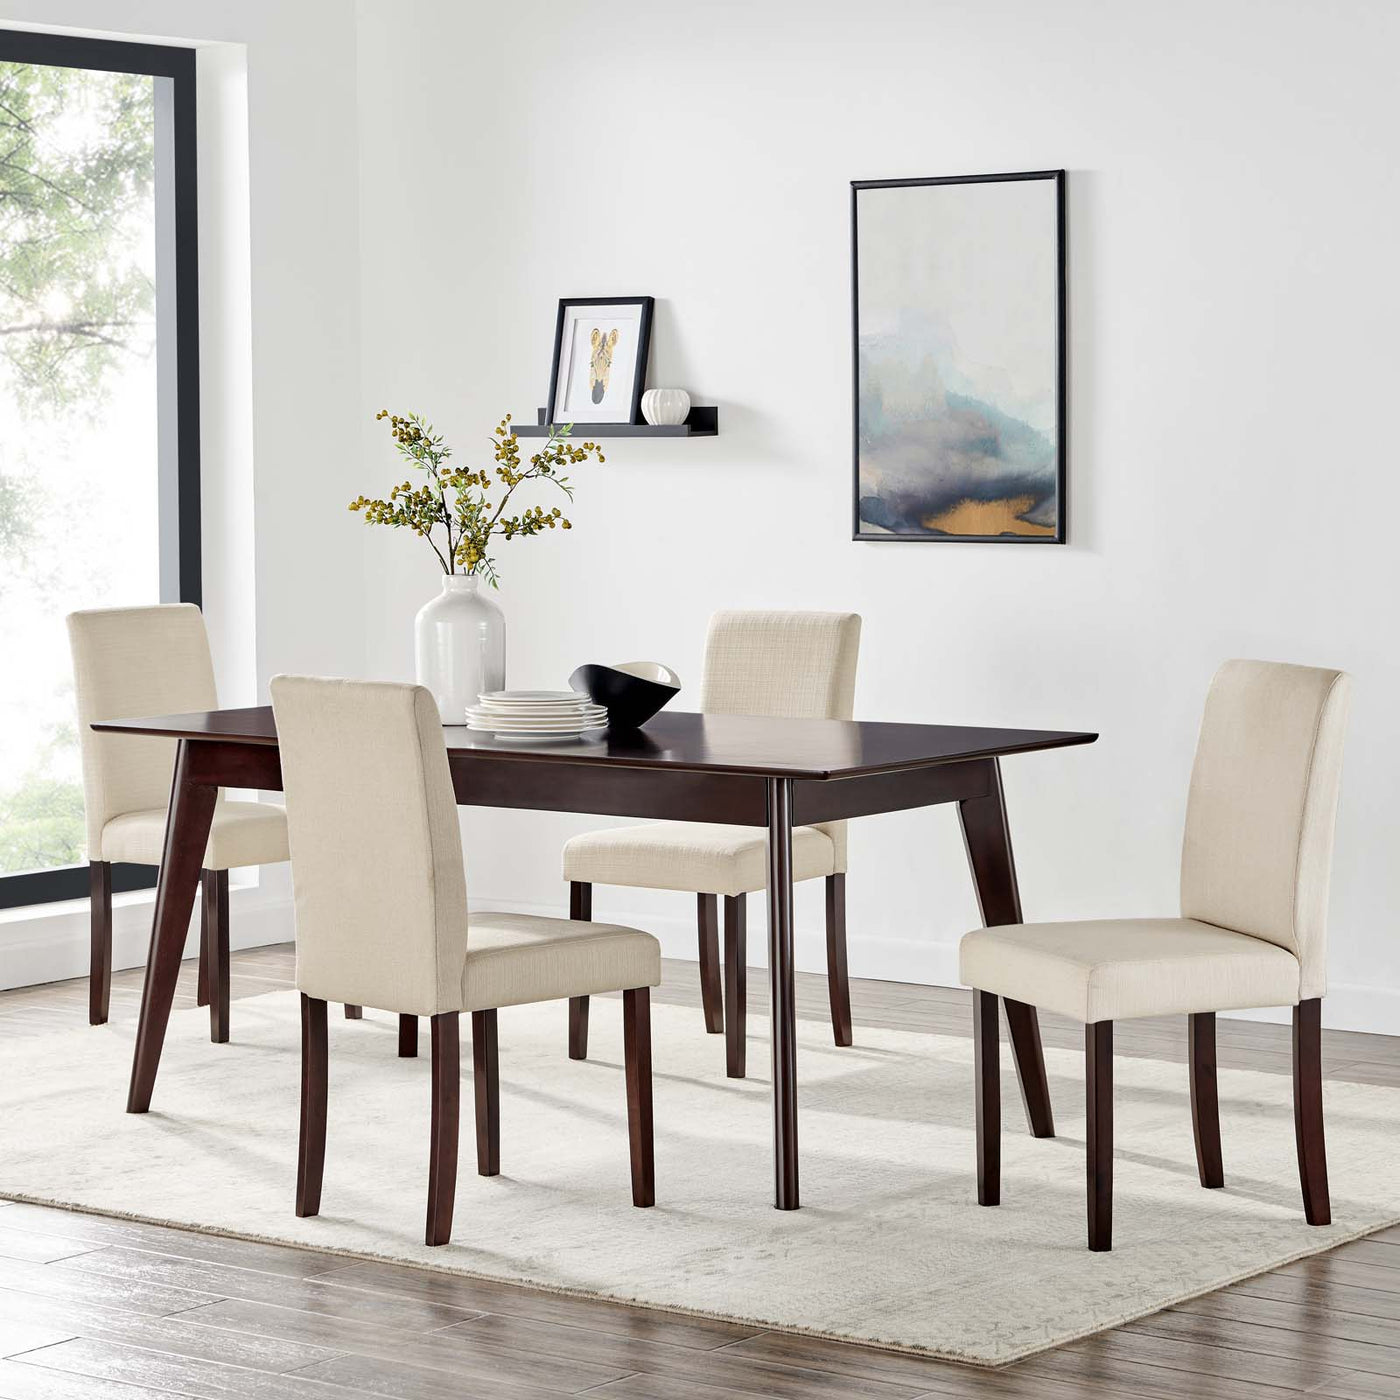 Nationwide Dining Table Sets